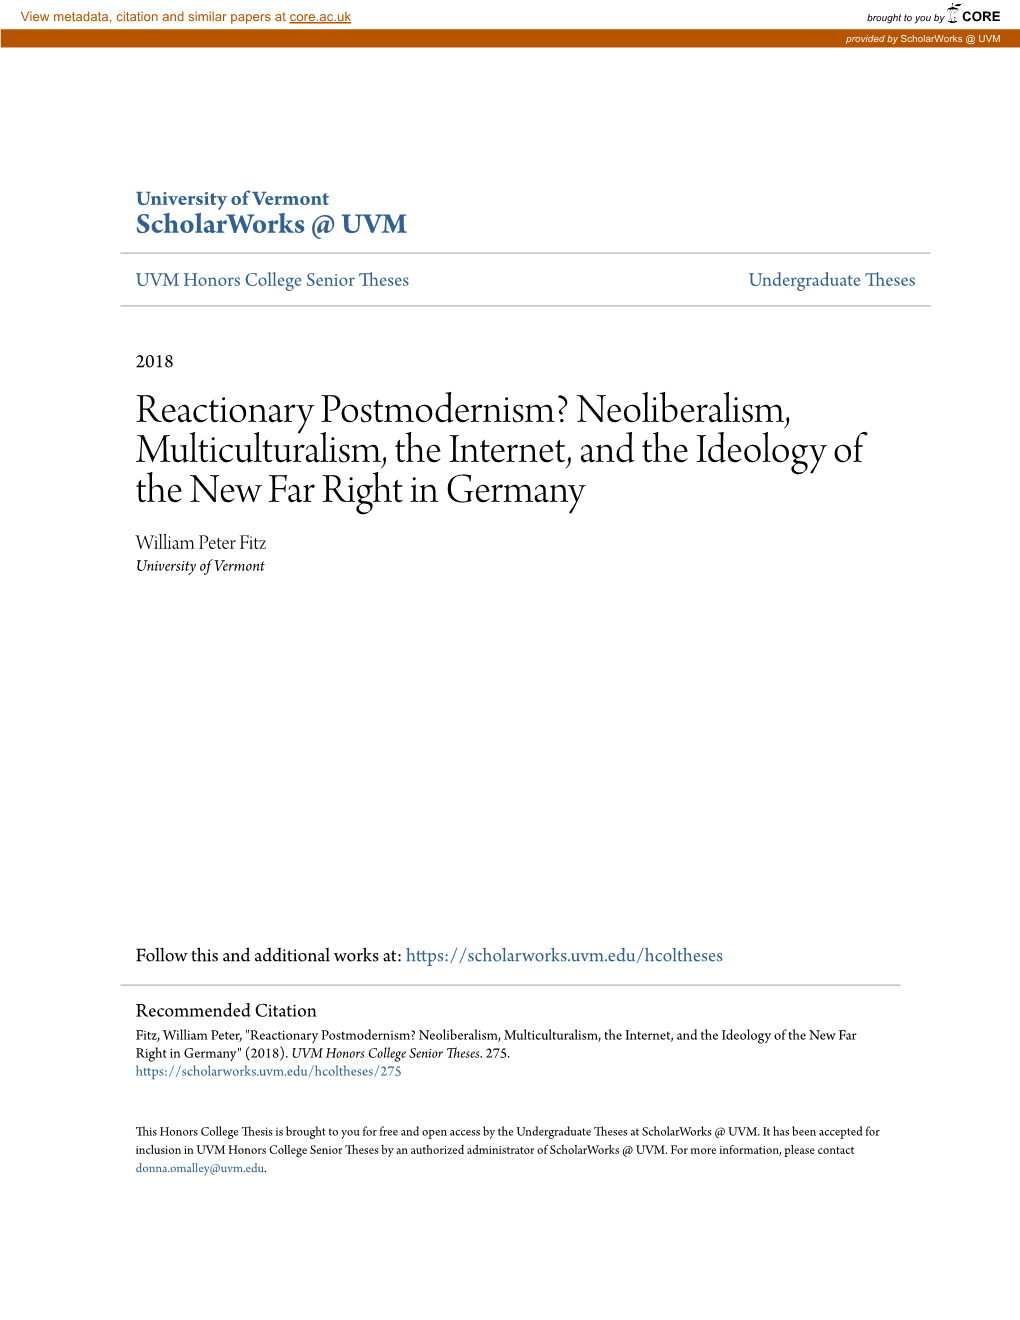 Reactionary Postmodernism? Neoliberalism, Multiculturalism, the Internet, and the Ideology of the New Far Right in Germany William Peter Fitz University of Vermont